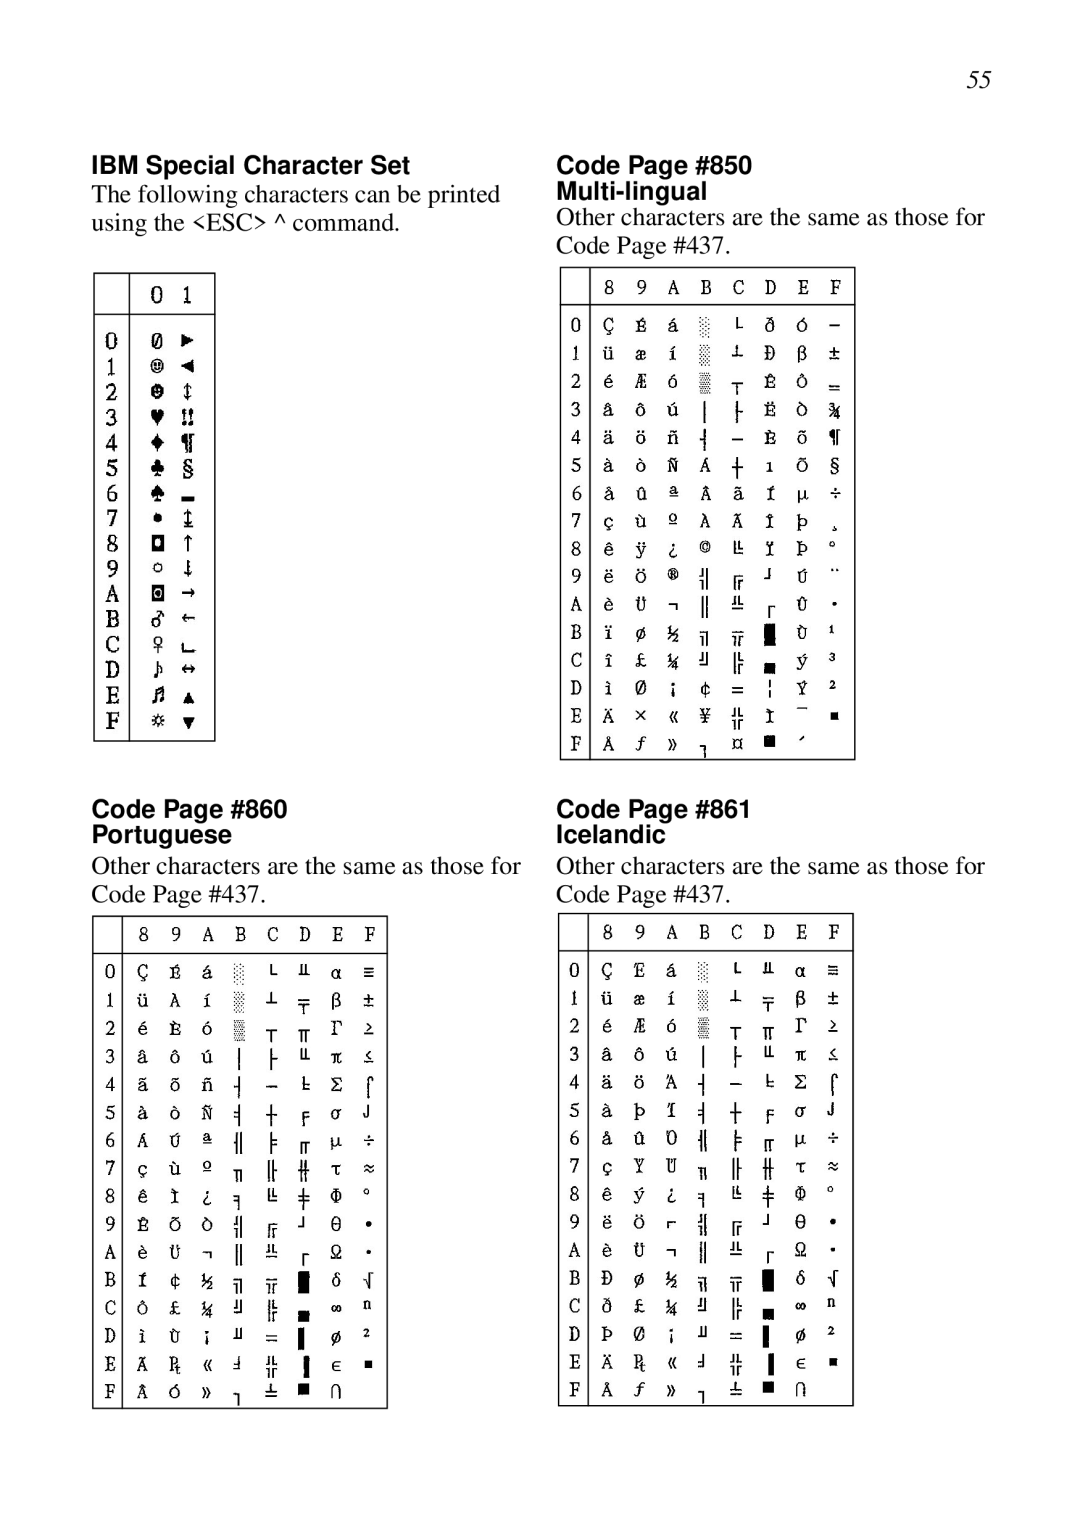 Star Micronics LC-8021 manual IBM Special Character Set, Code Page #860 Portuguese, Code Page #850 Multi-lingual 